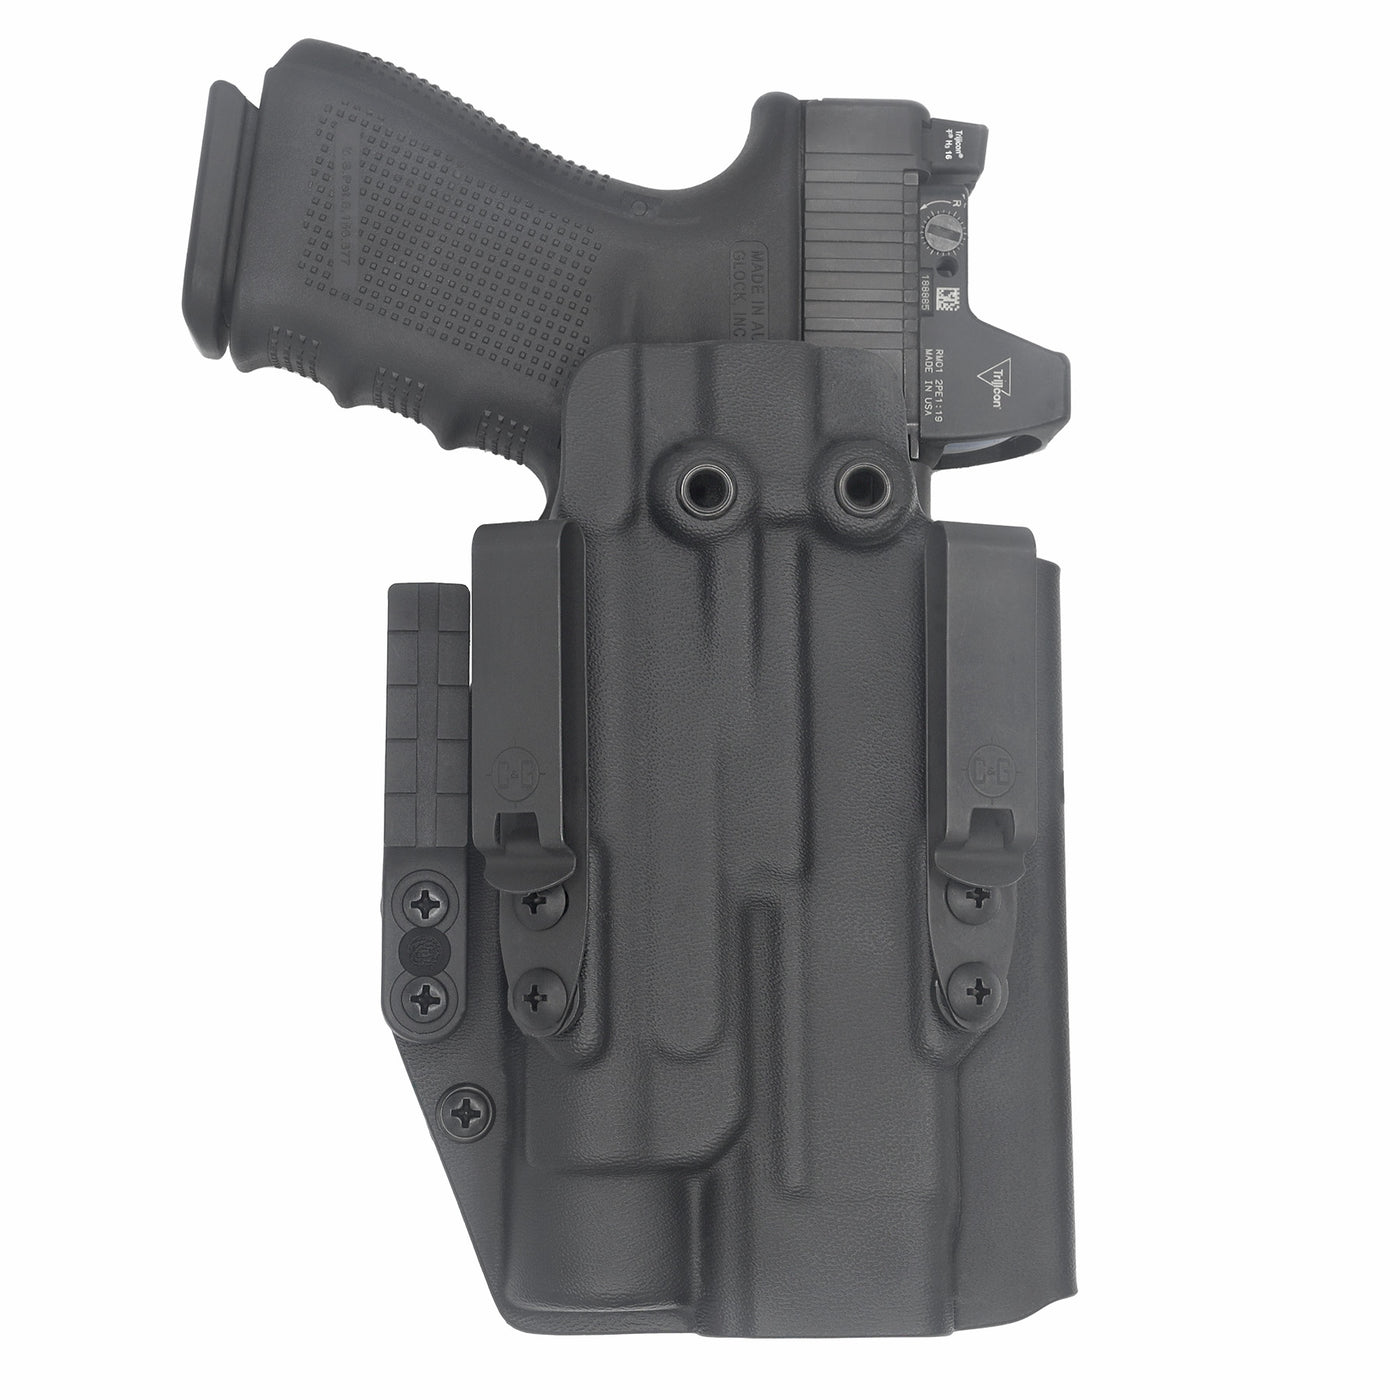 C&G Holsters quickship IWB Tactical ALPHA UPGRADE Glock 20/21 Streamlight TLR1 in holstered position